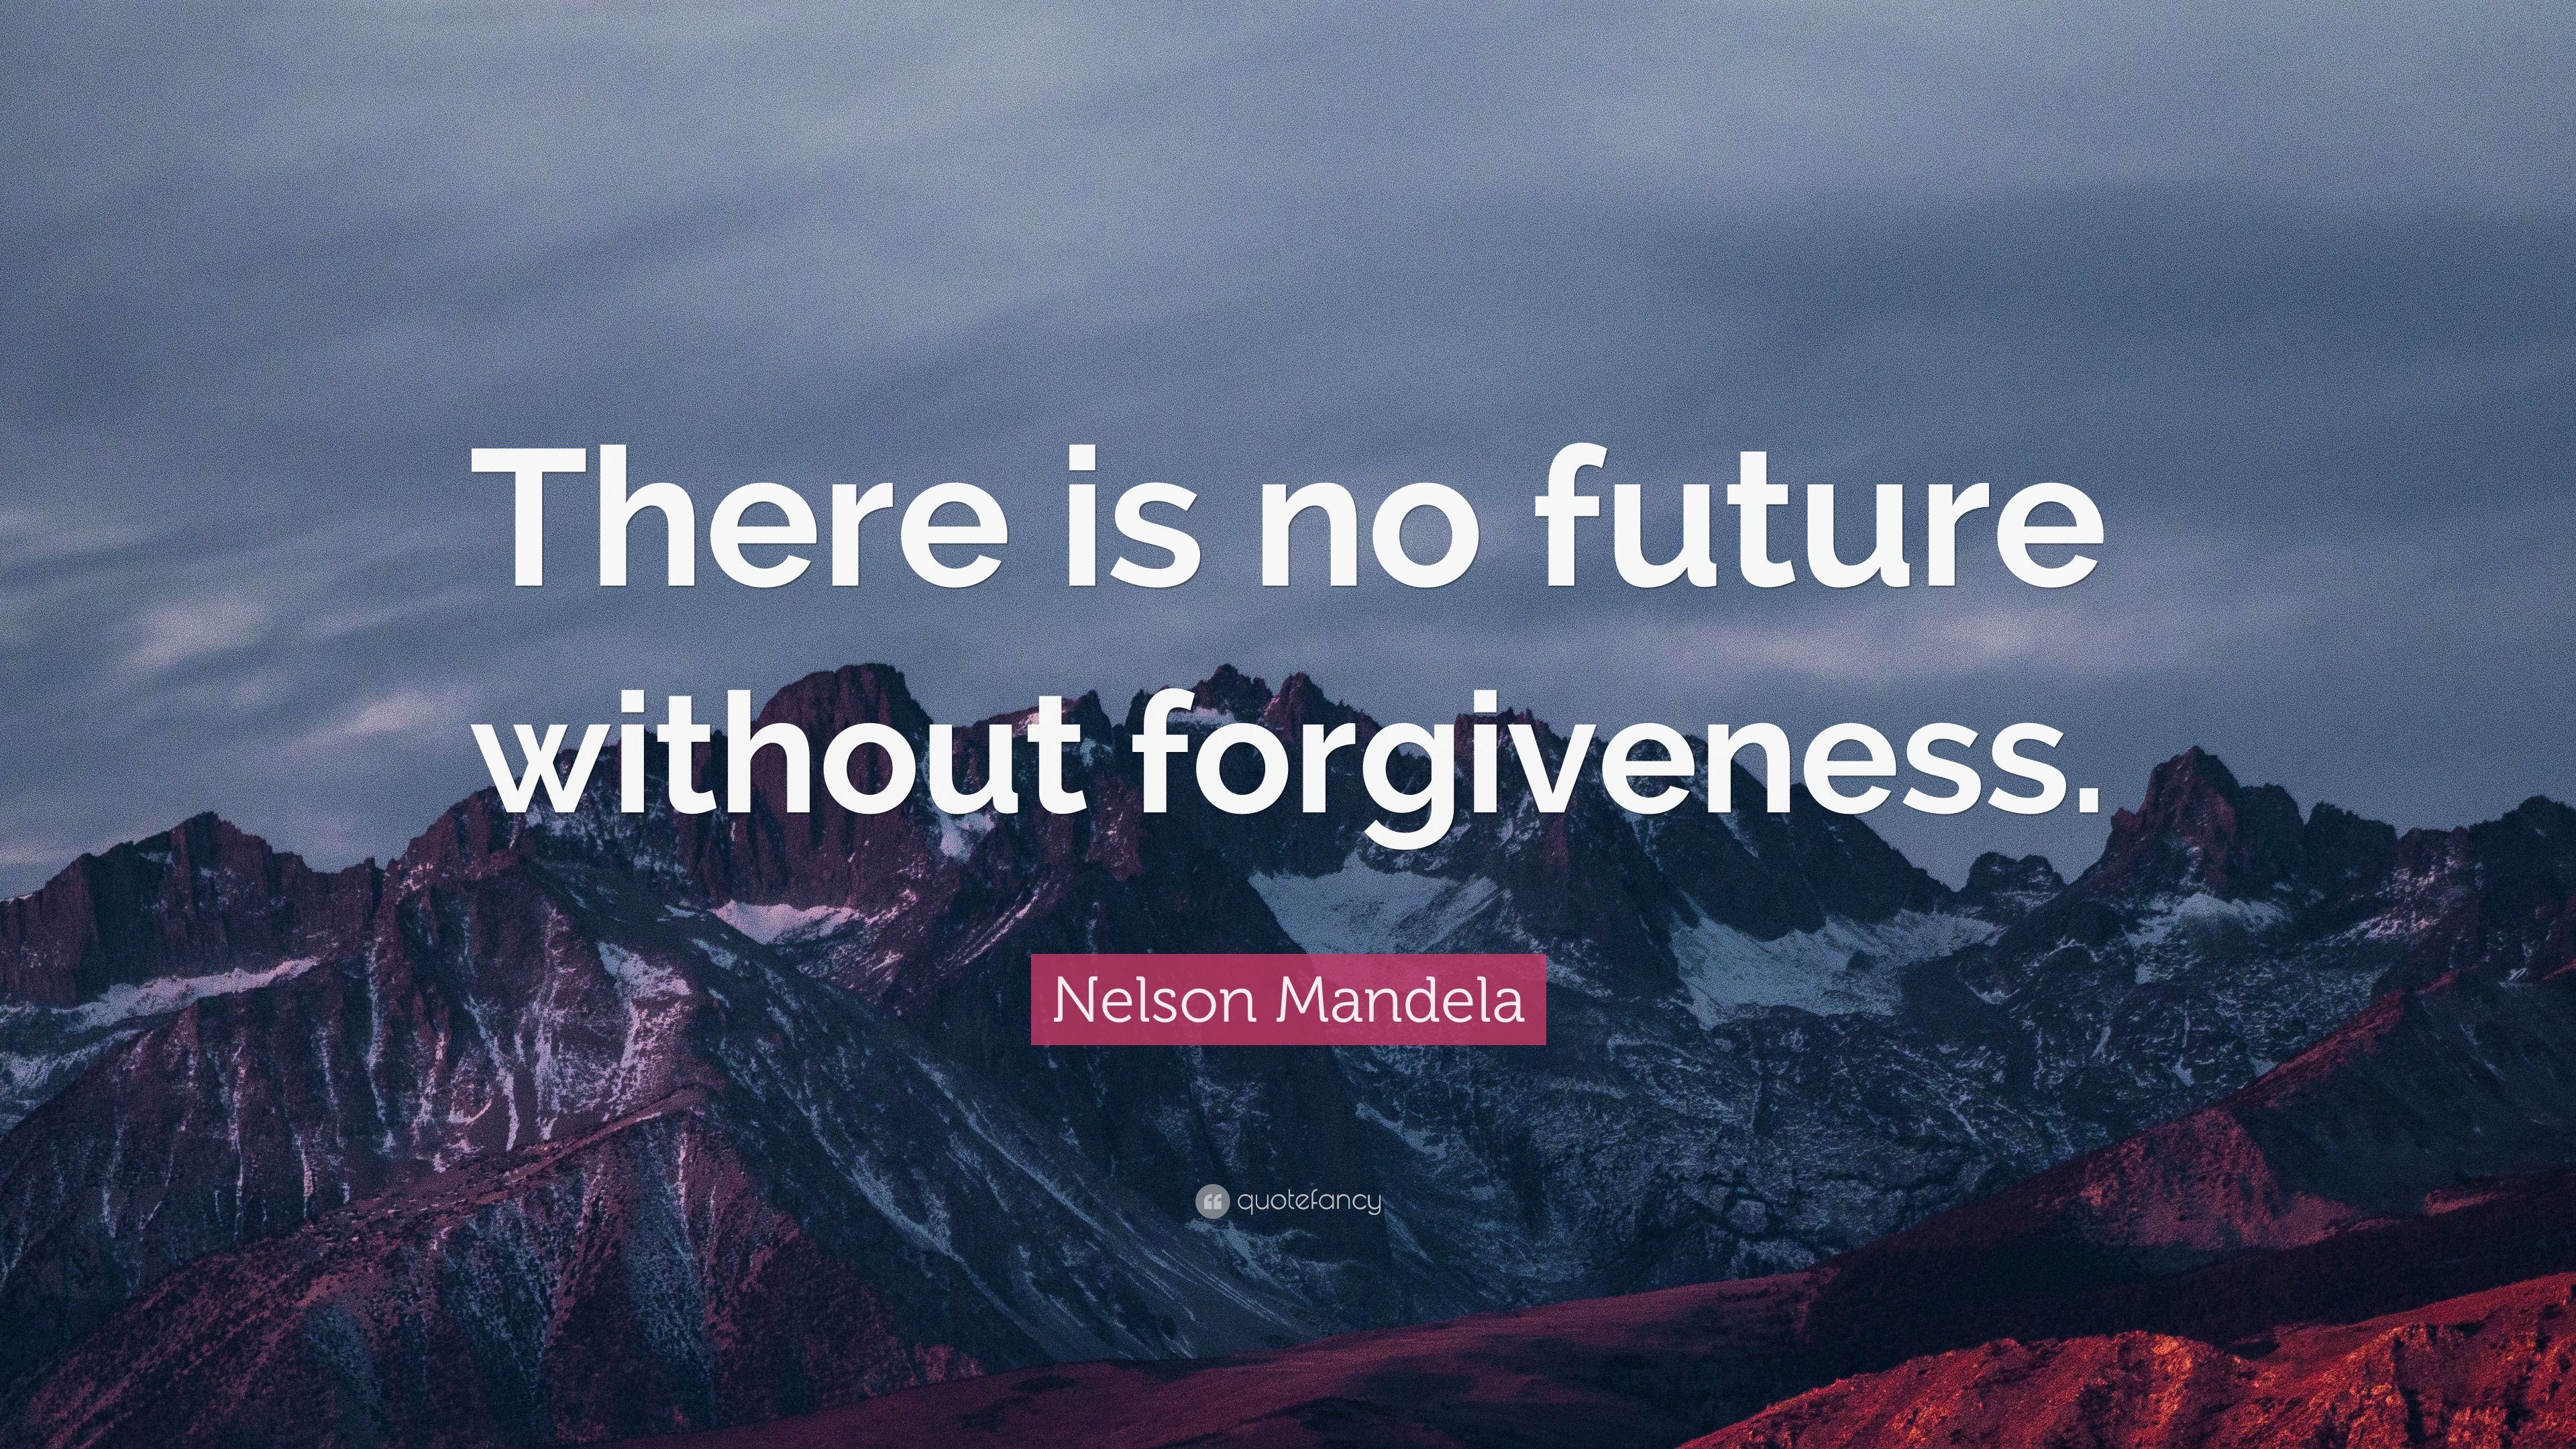 Nelson Mandela Quote: “There is no future without forgiveness